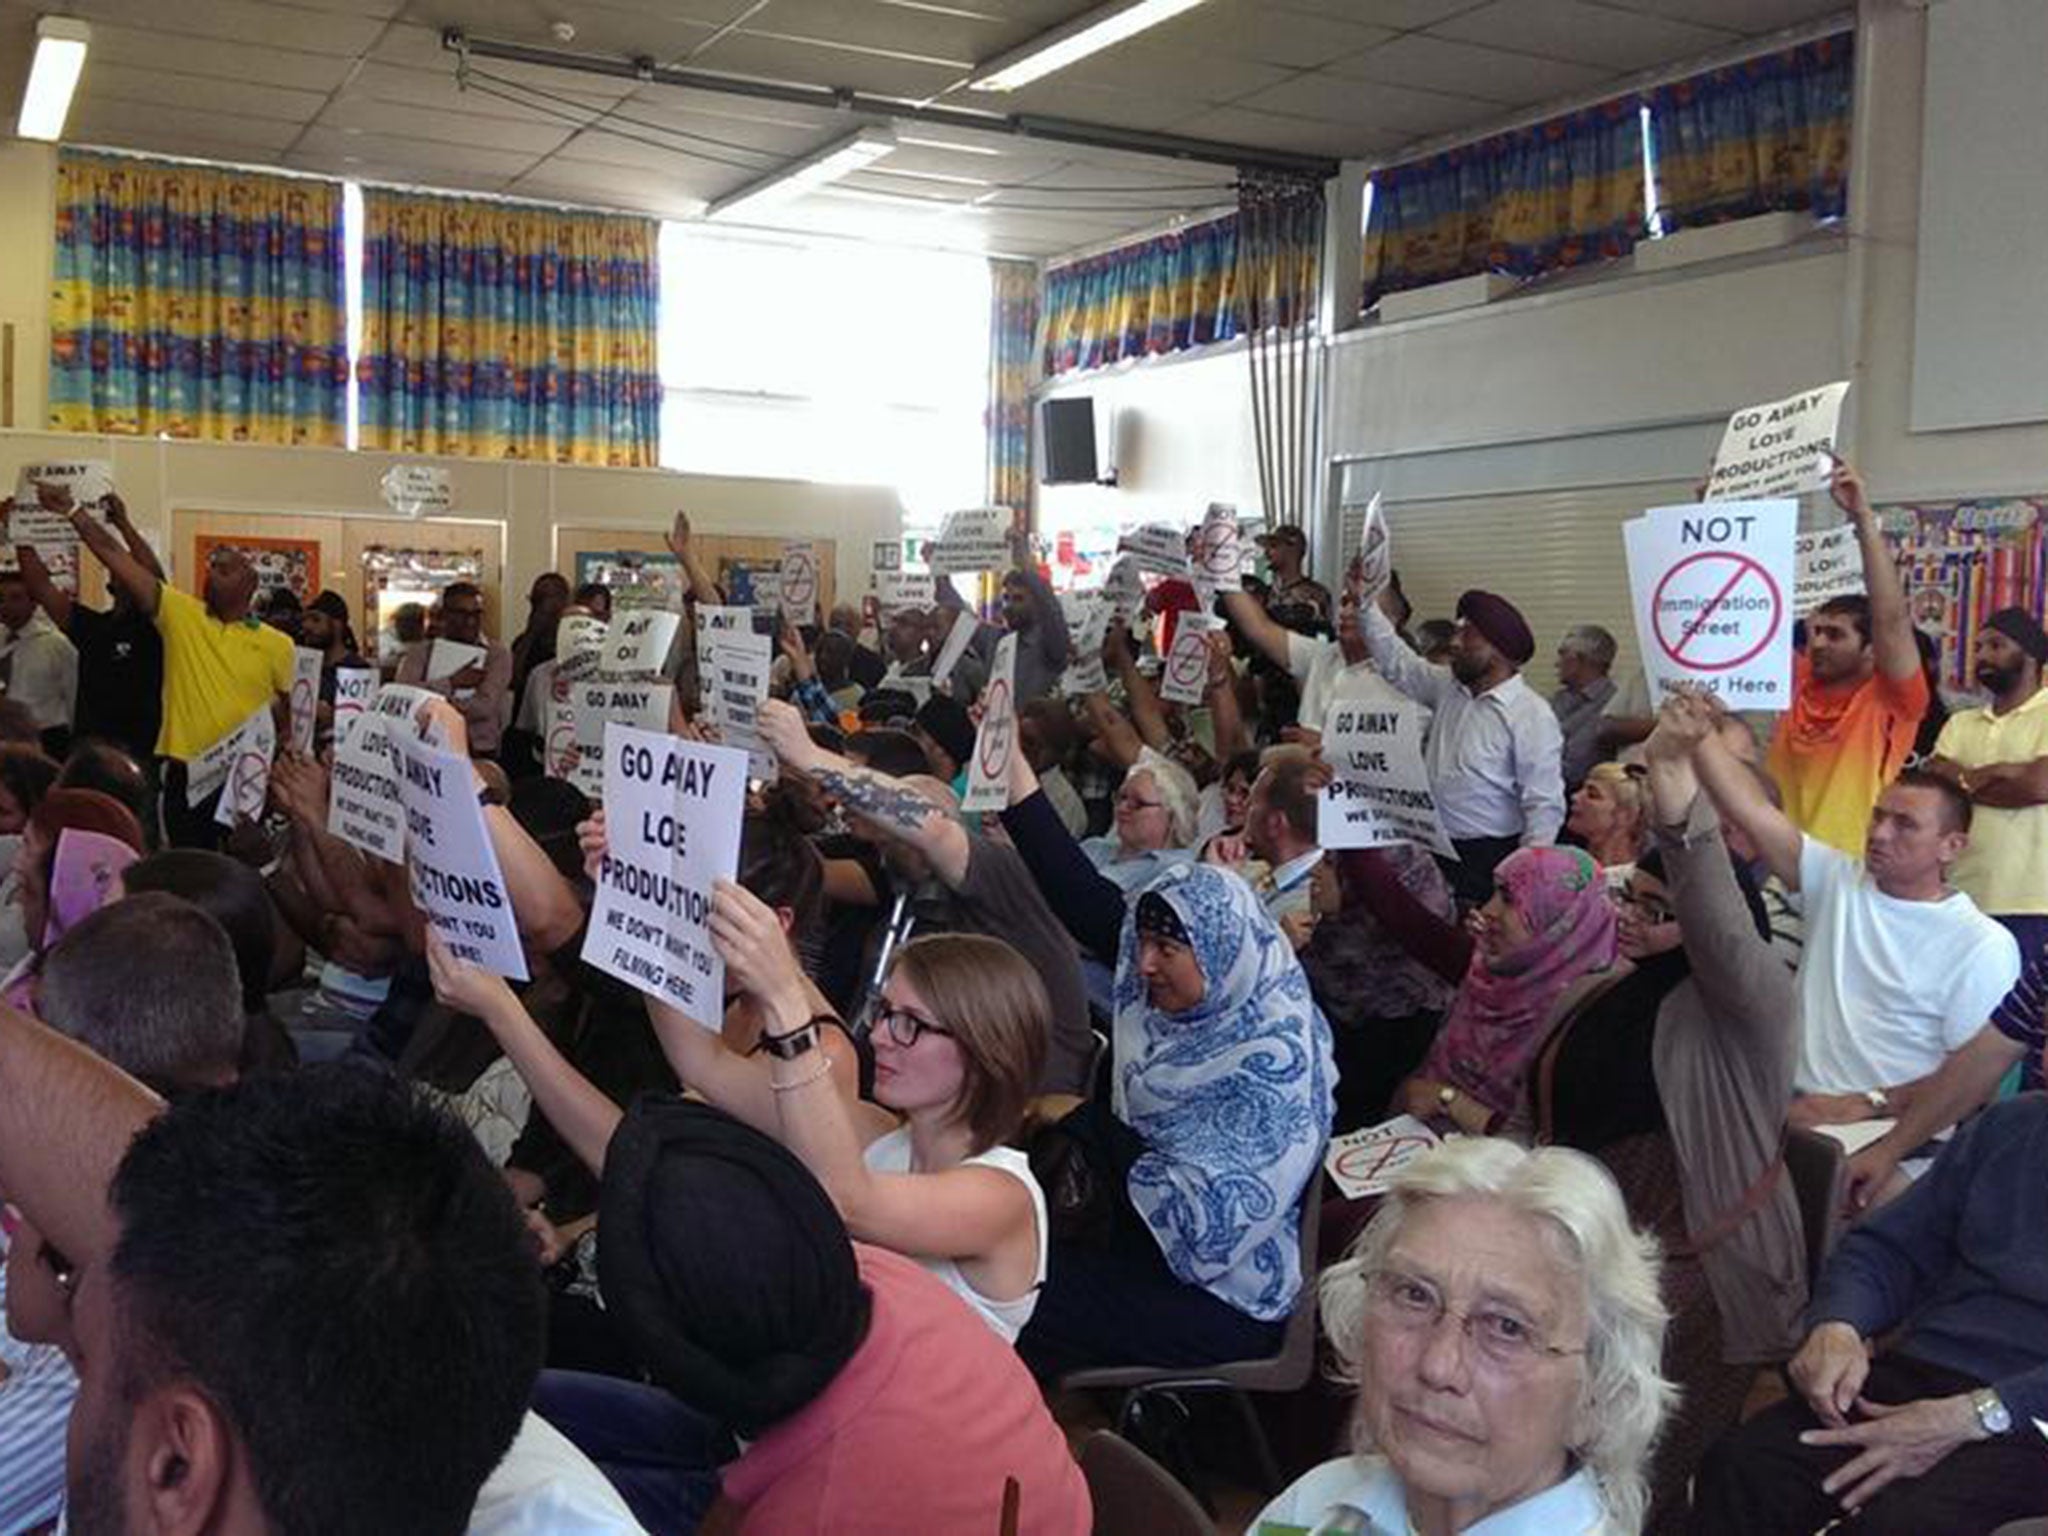 Residents of Derby Road in Southampton oppose filming of Channel 4 documentary Immigration Street in their community